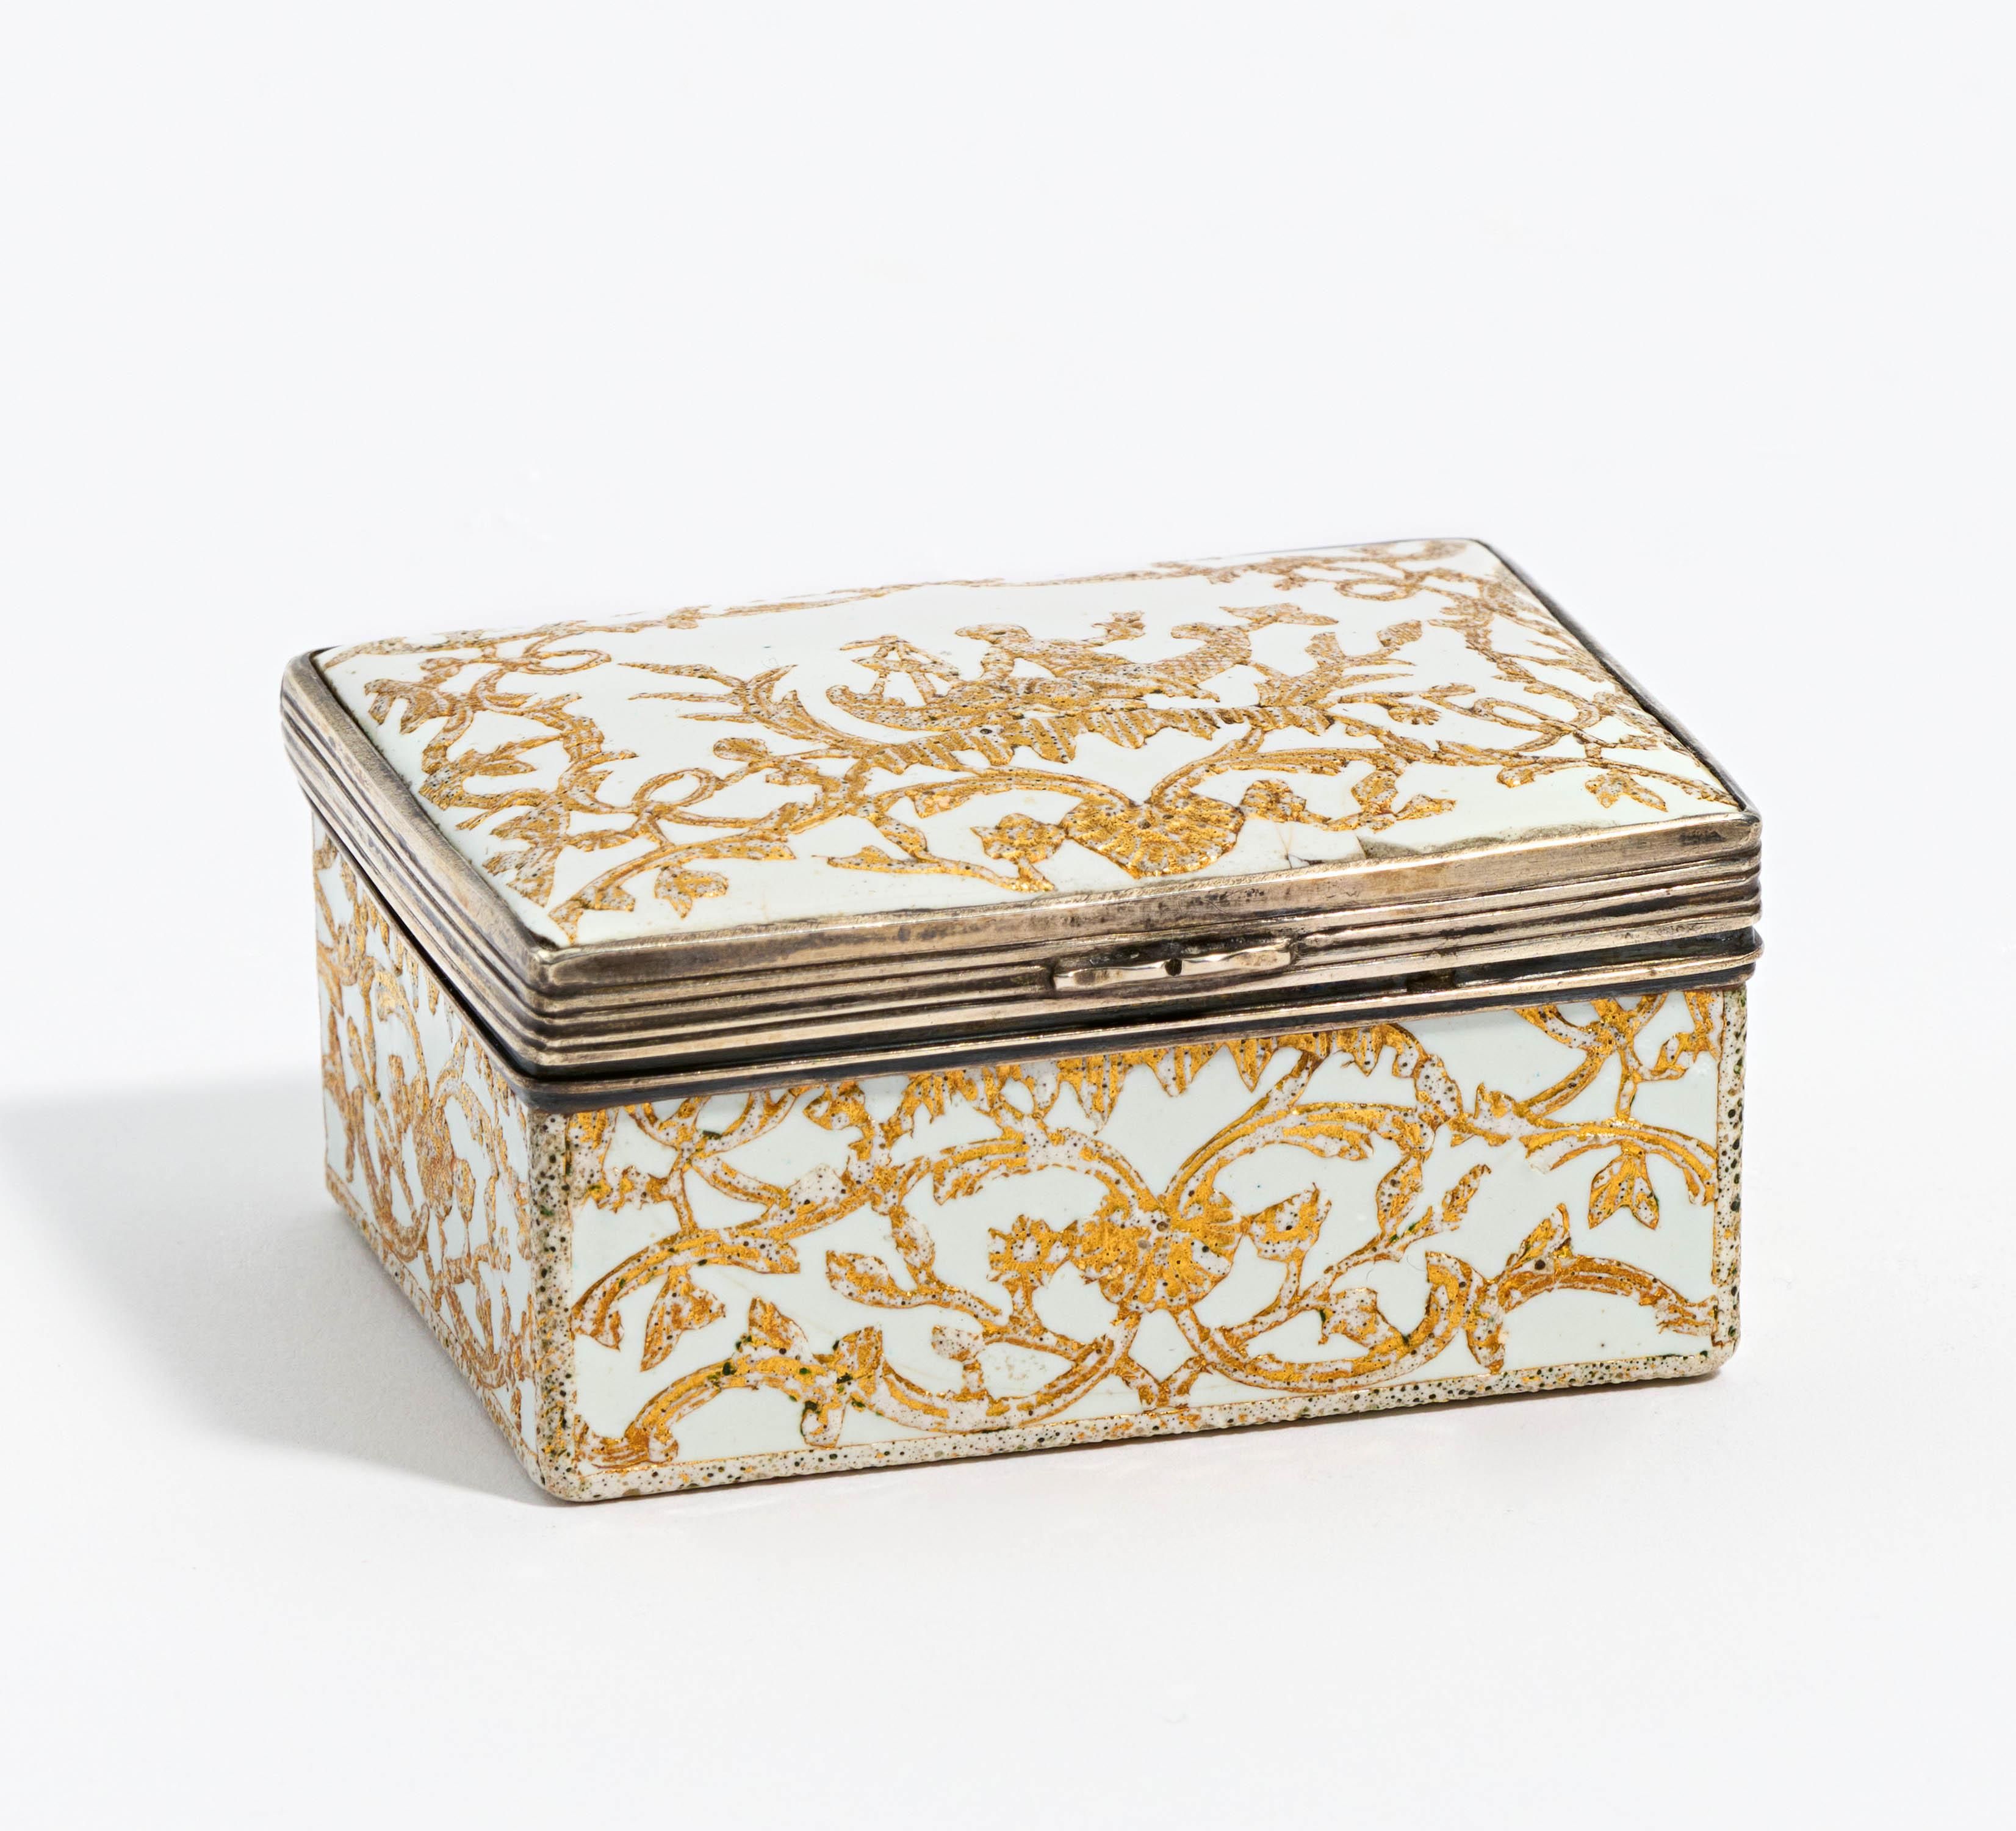 Snuff box with gold décor